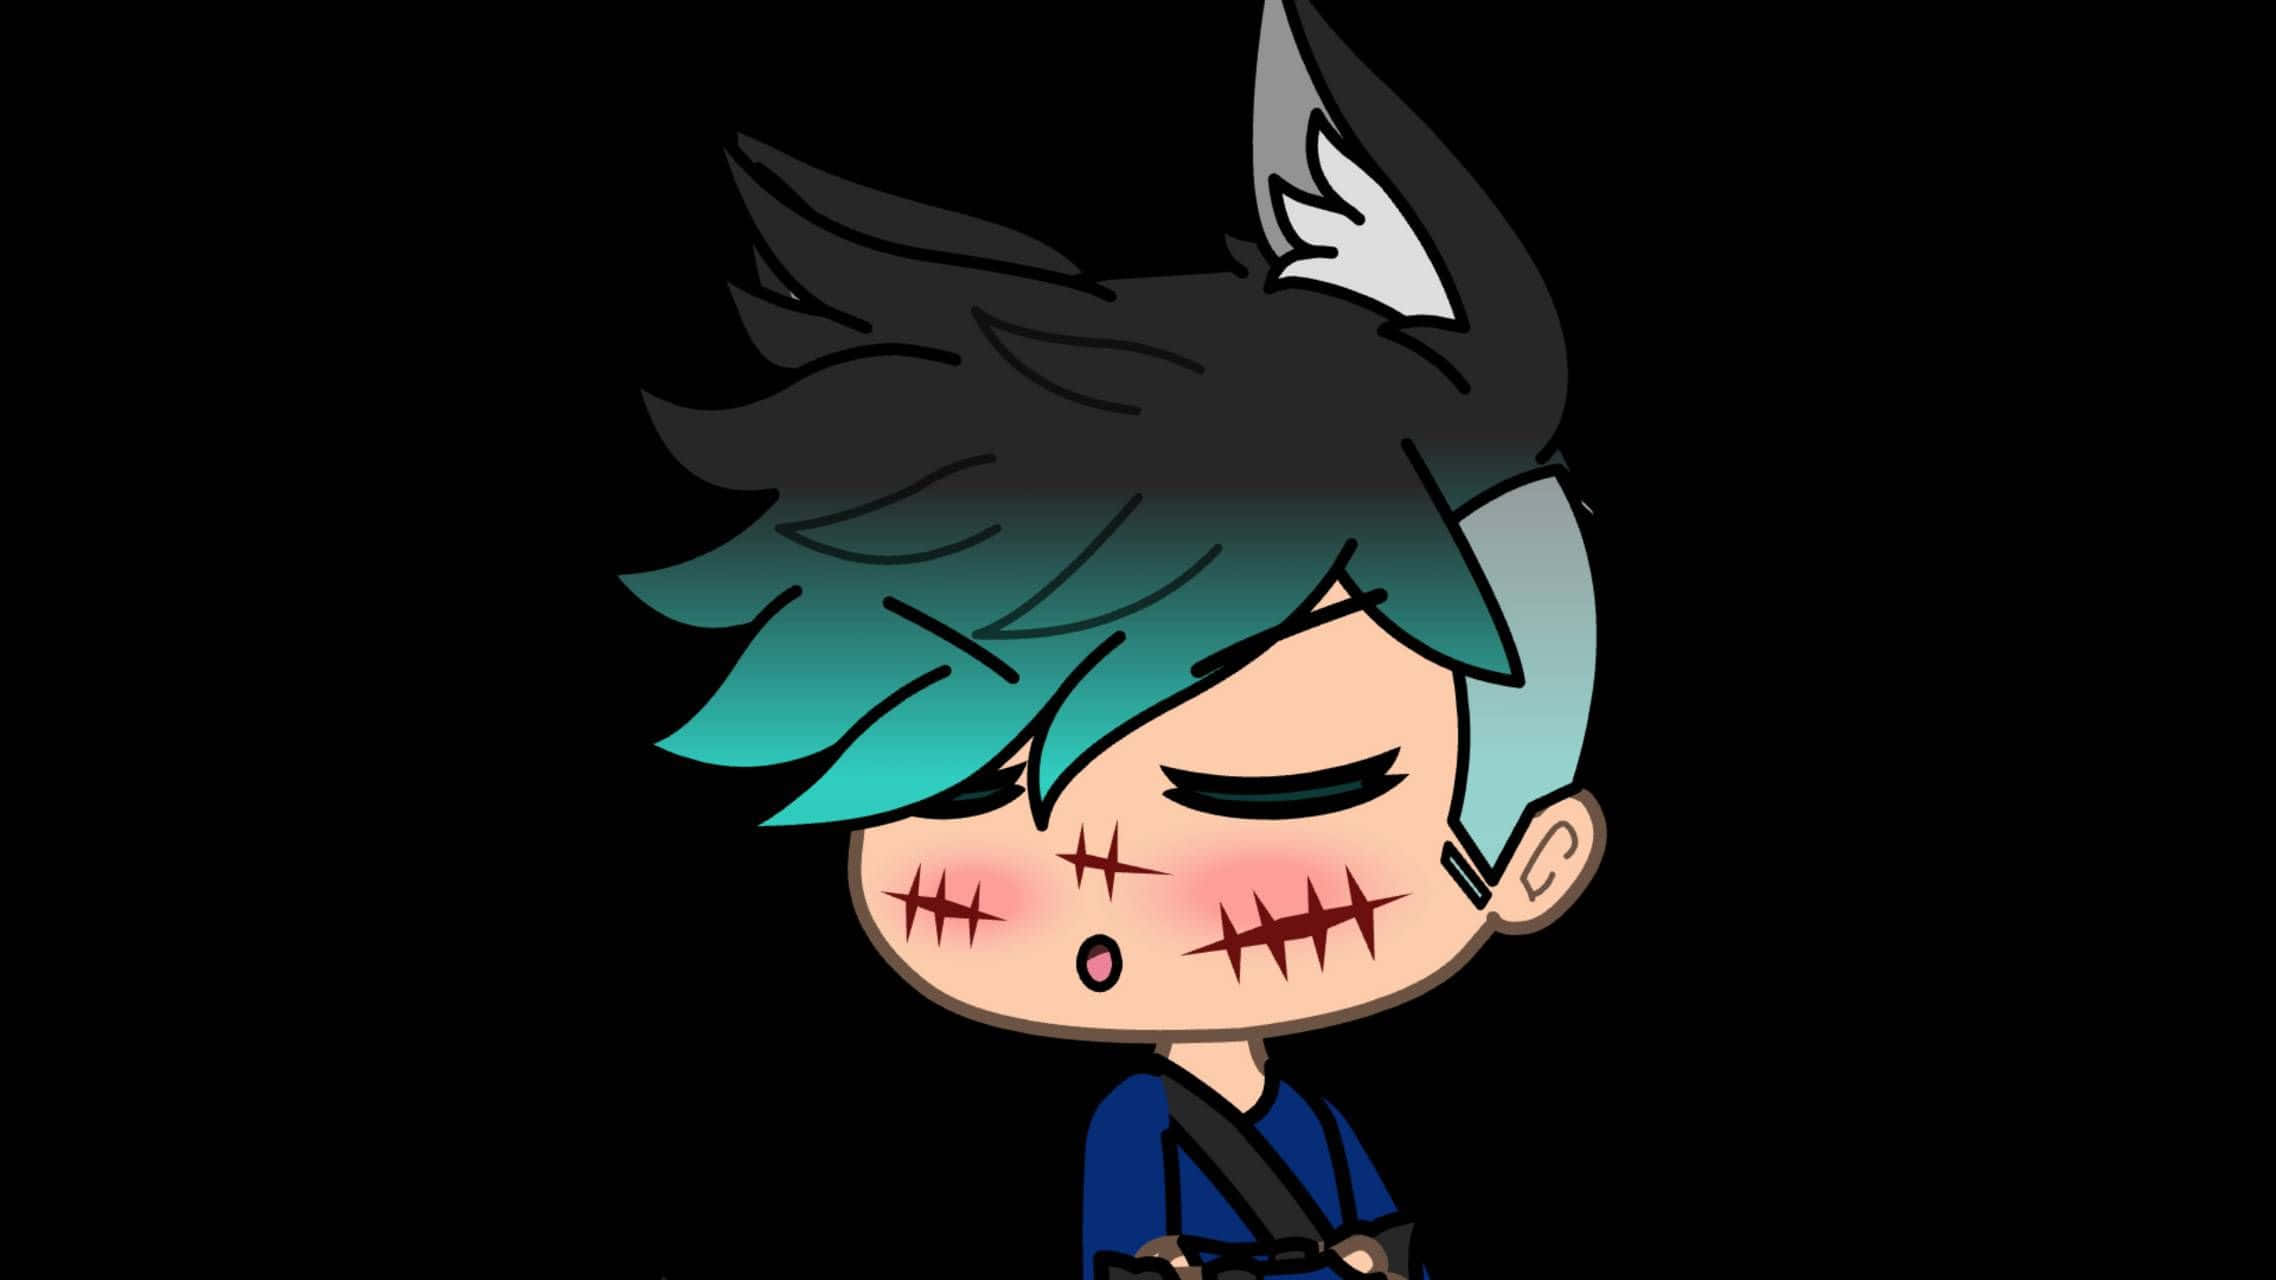 A Cartoon Character With Blue Hair And A Knife